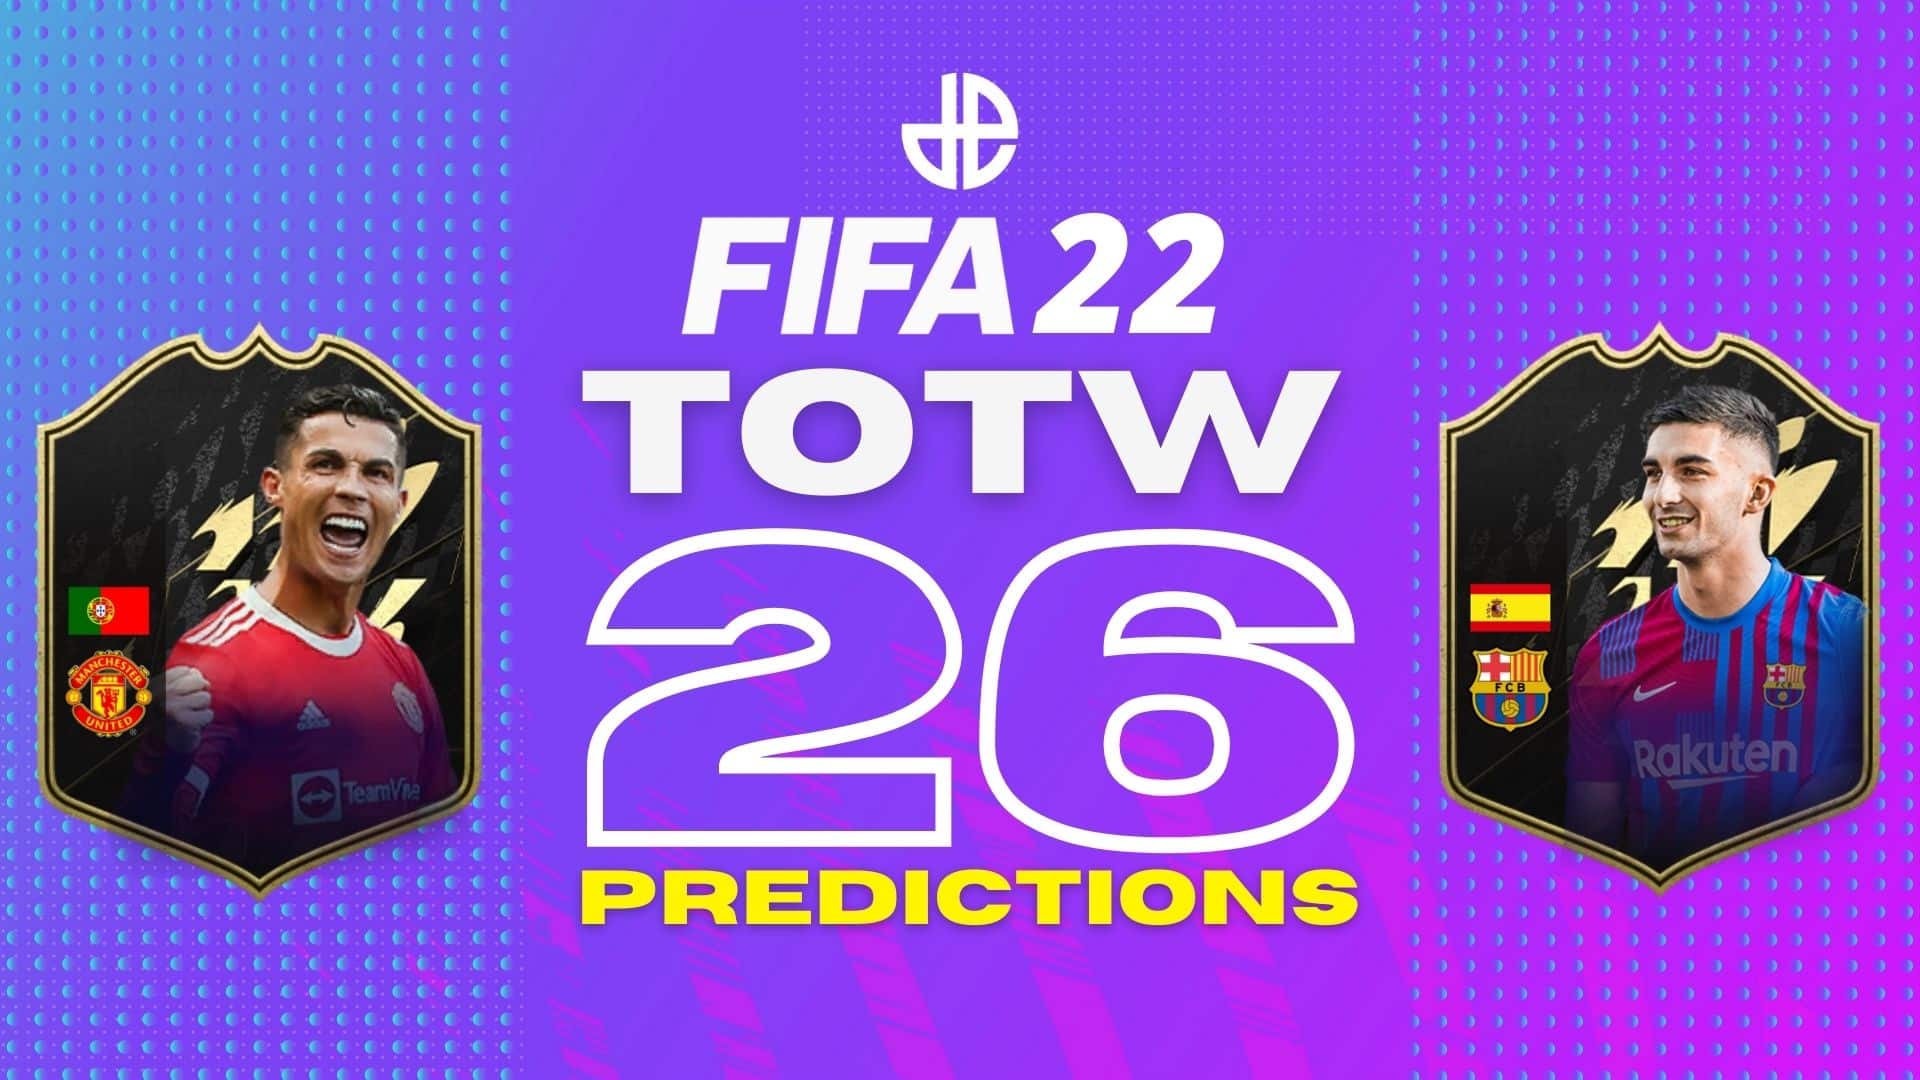 FIFA 22 TOTW 26 cards and predictions